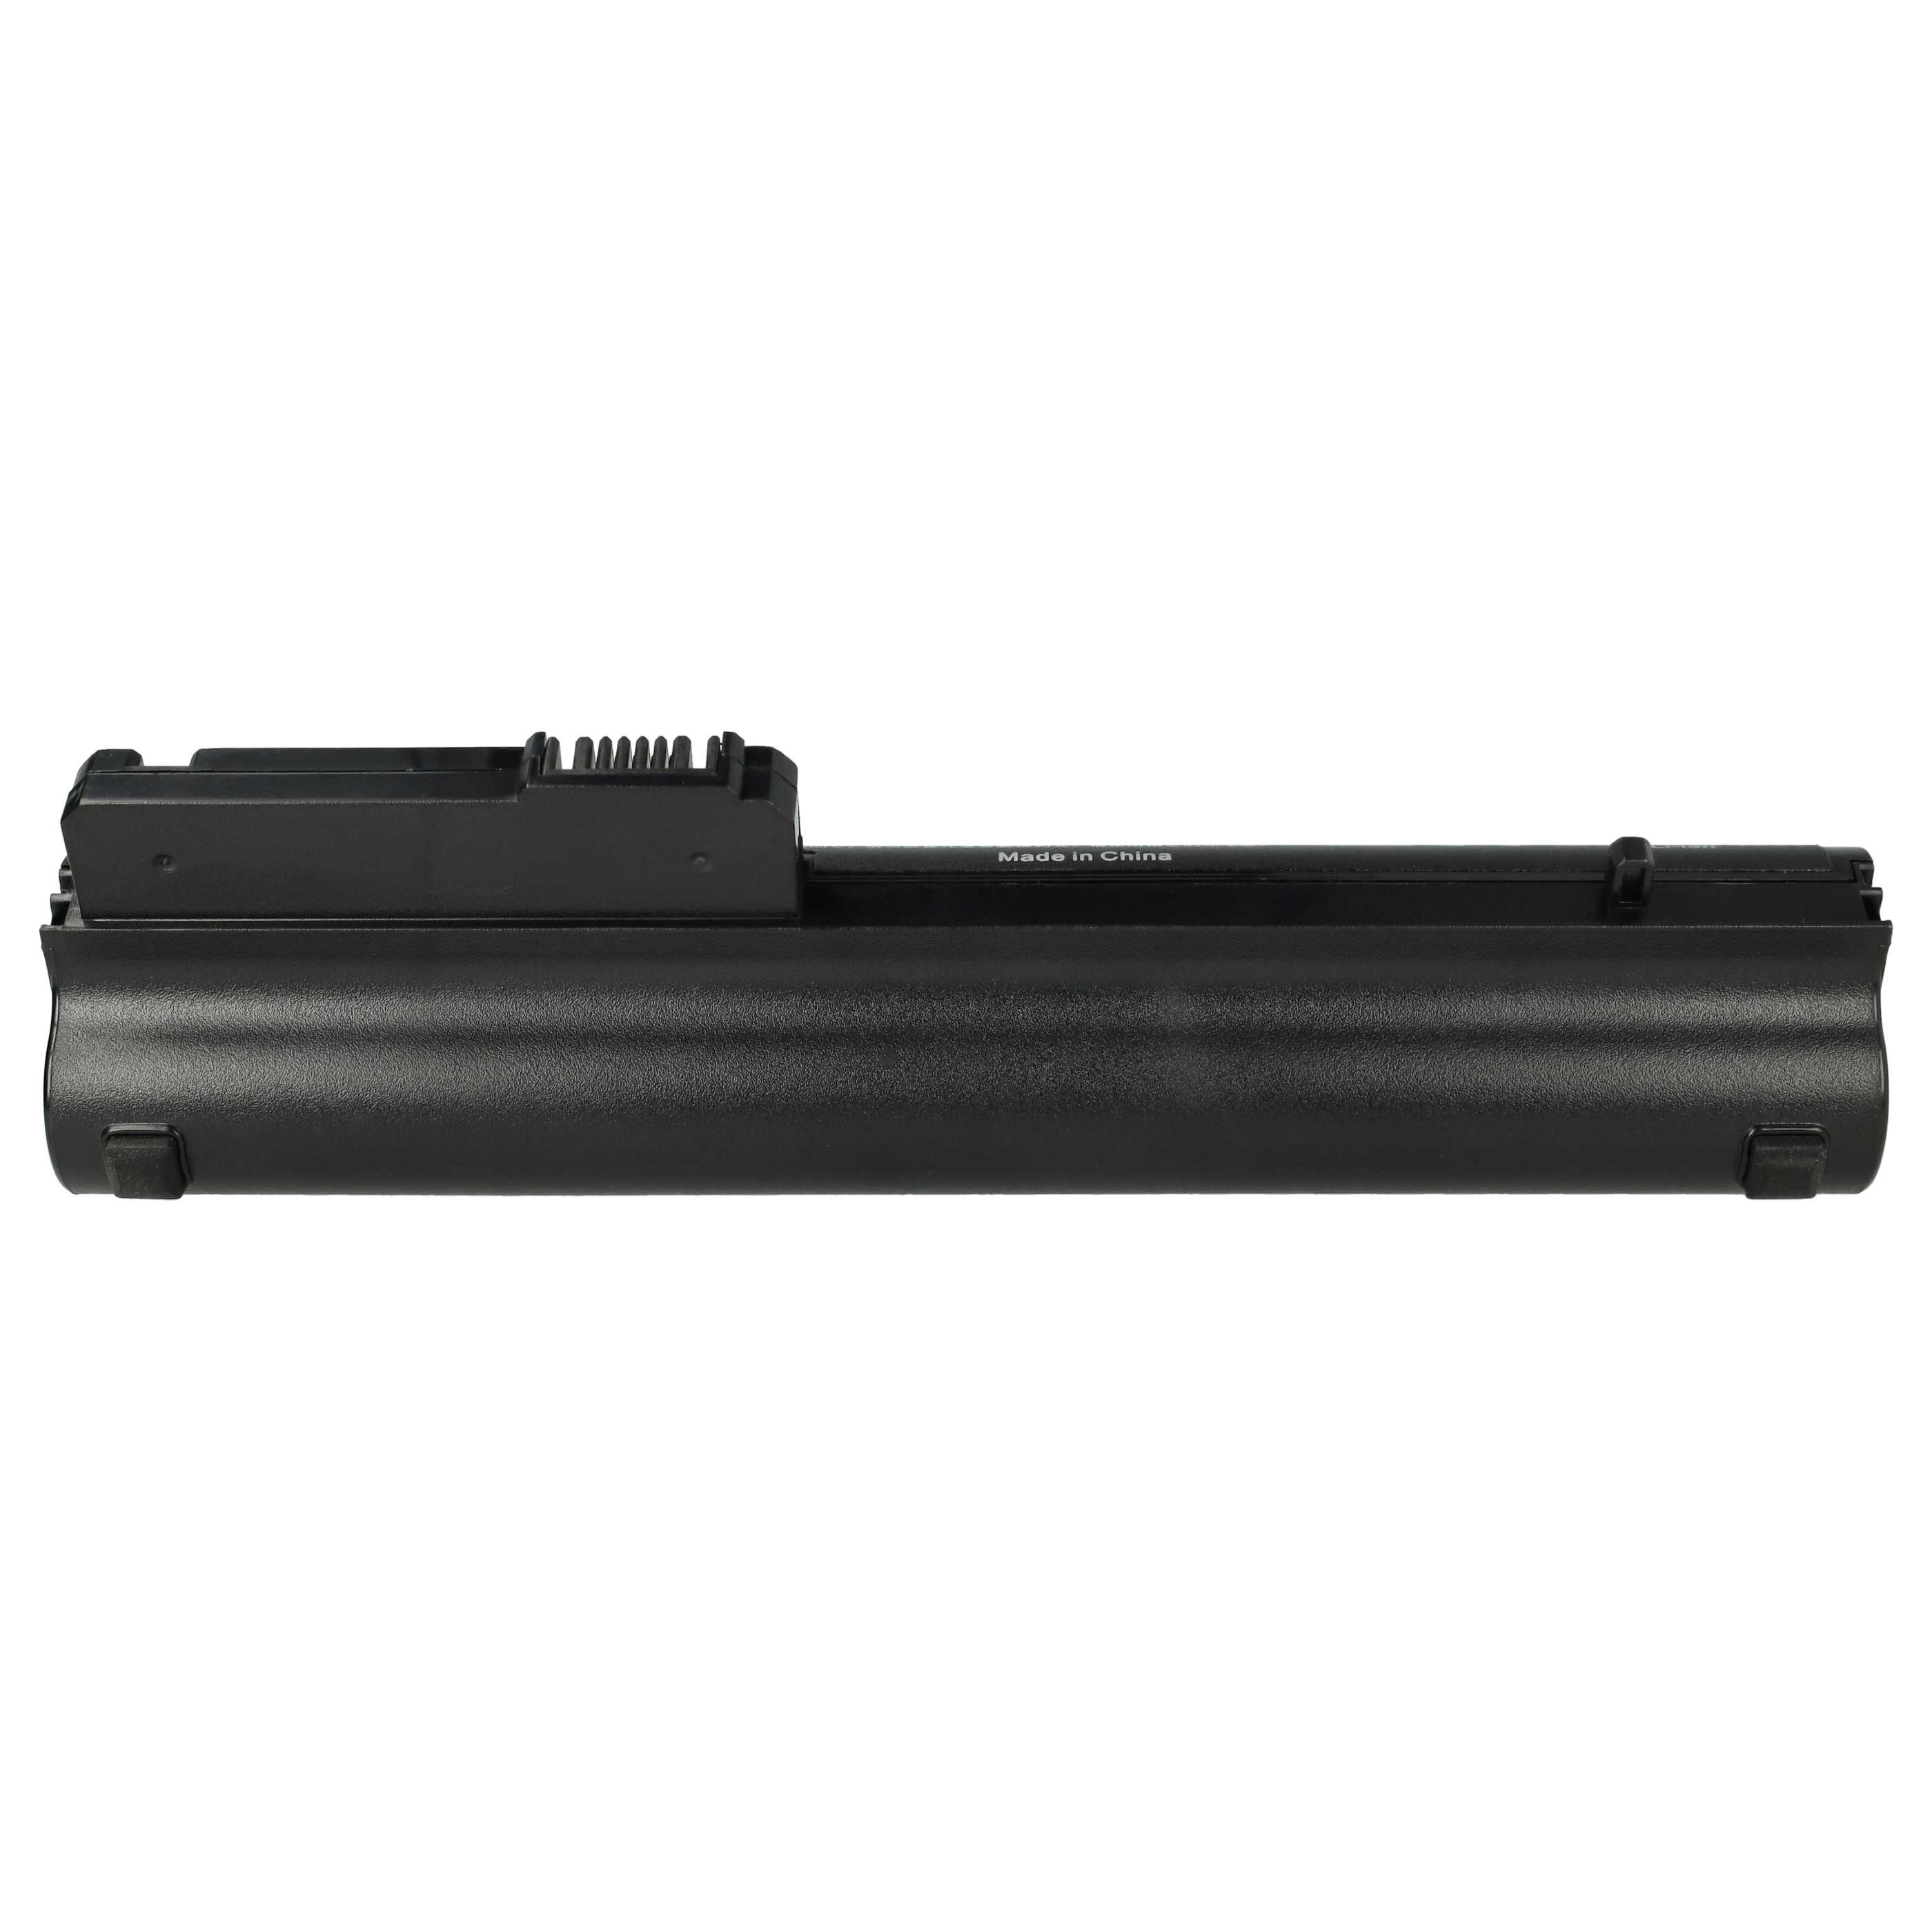 Notebook Battery Replacement for HP 404887-241, 411126-001, 404888-241 - 6600mAh 10.8V Li-Ion, black